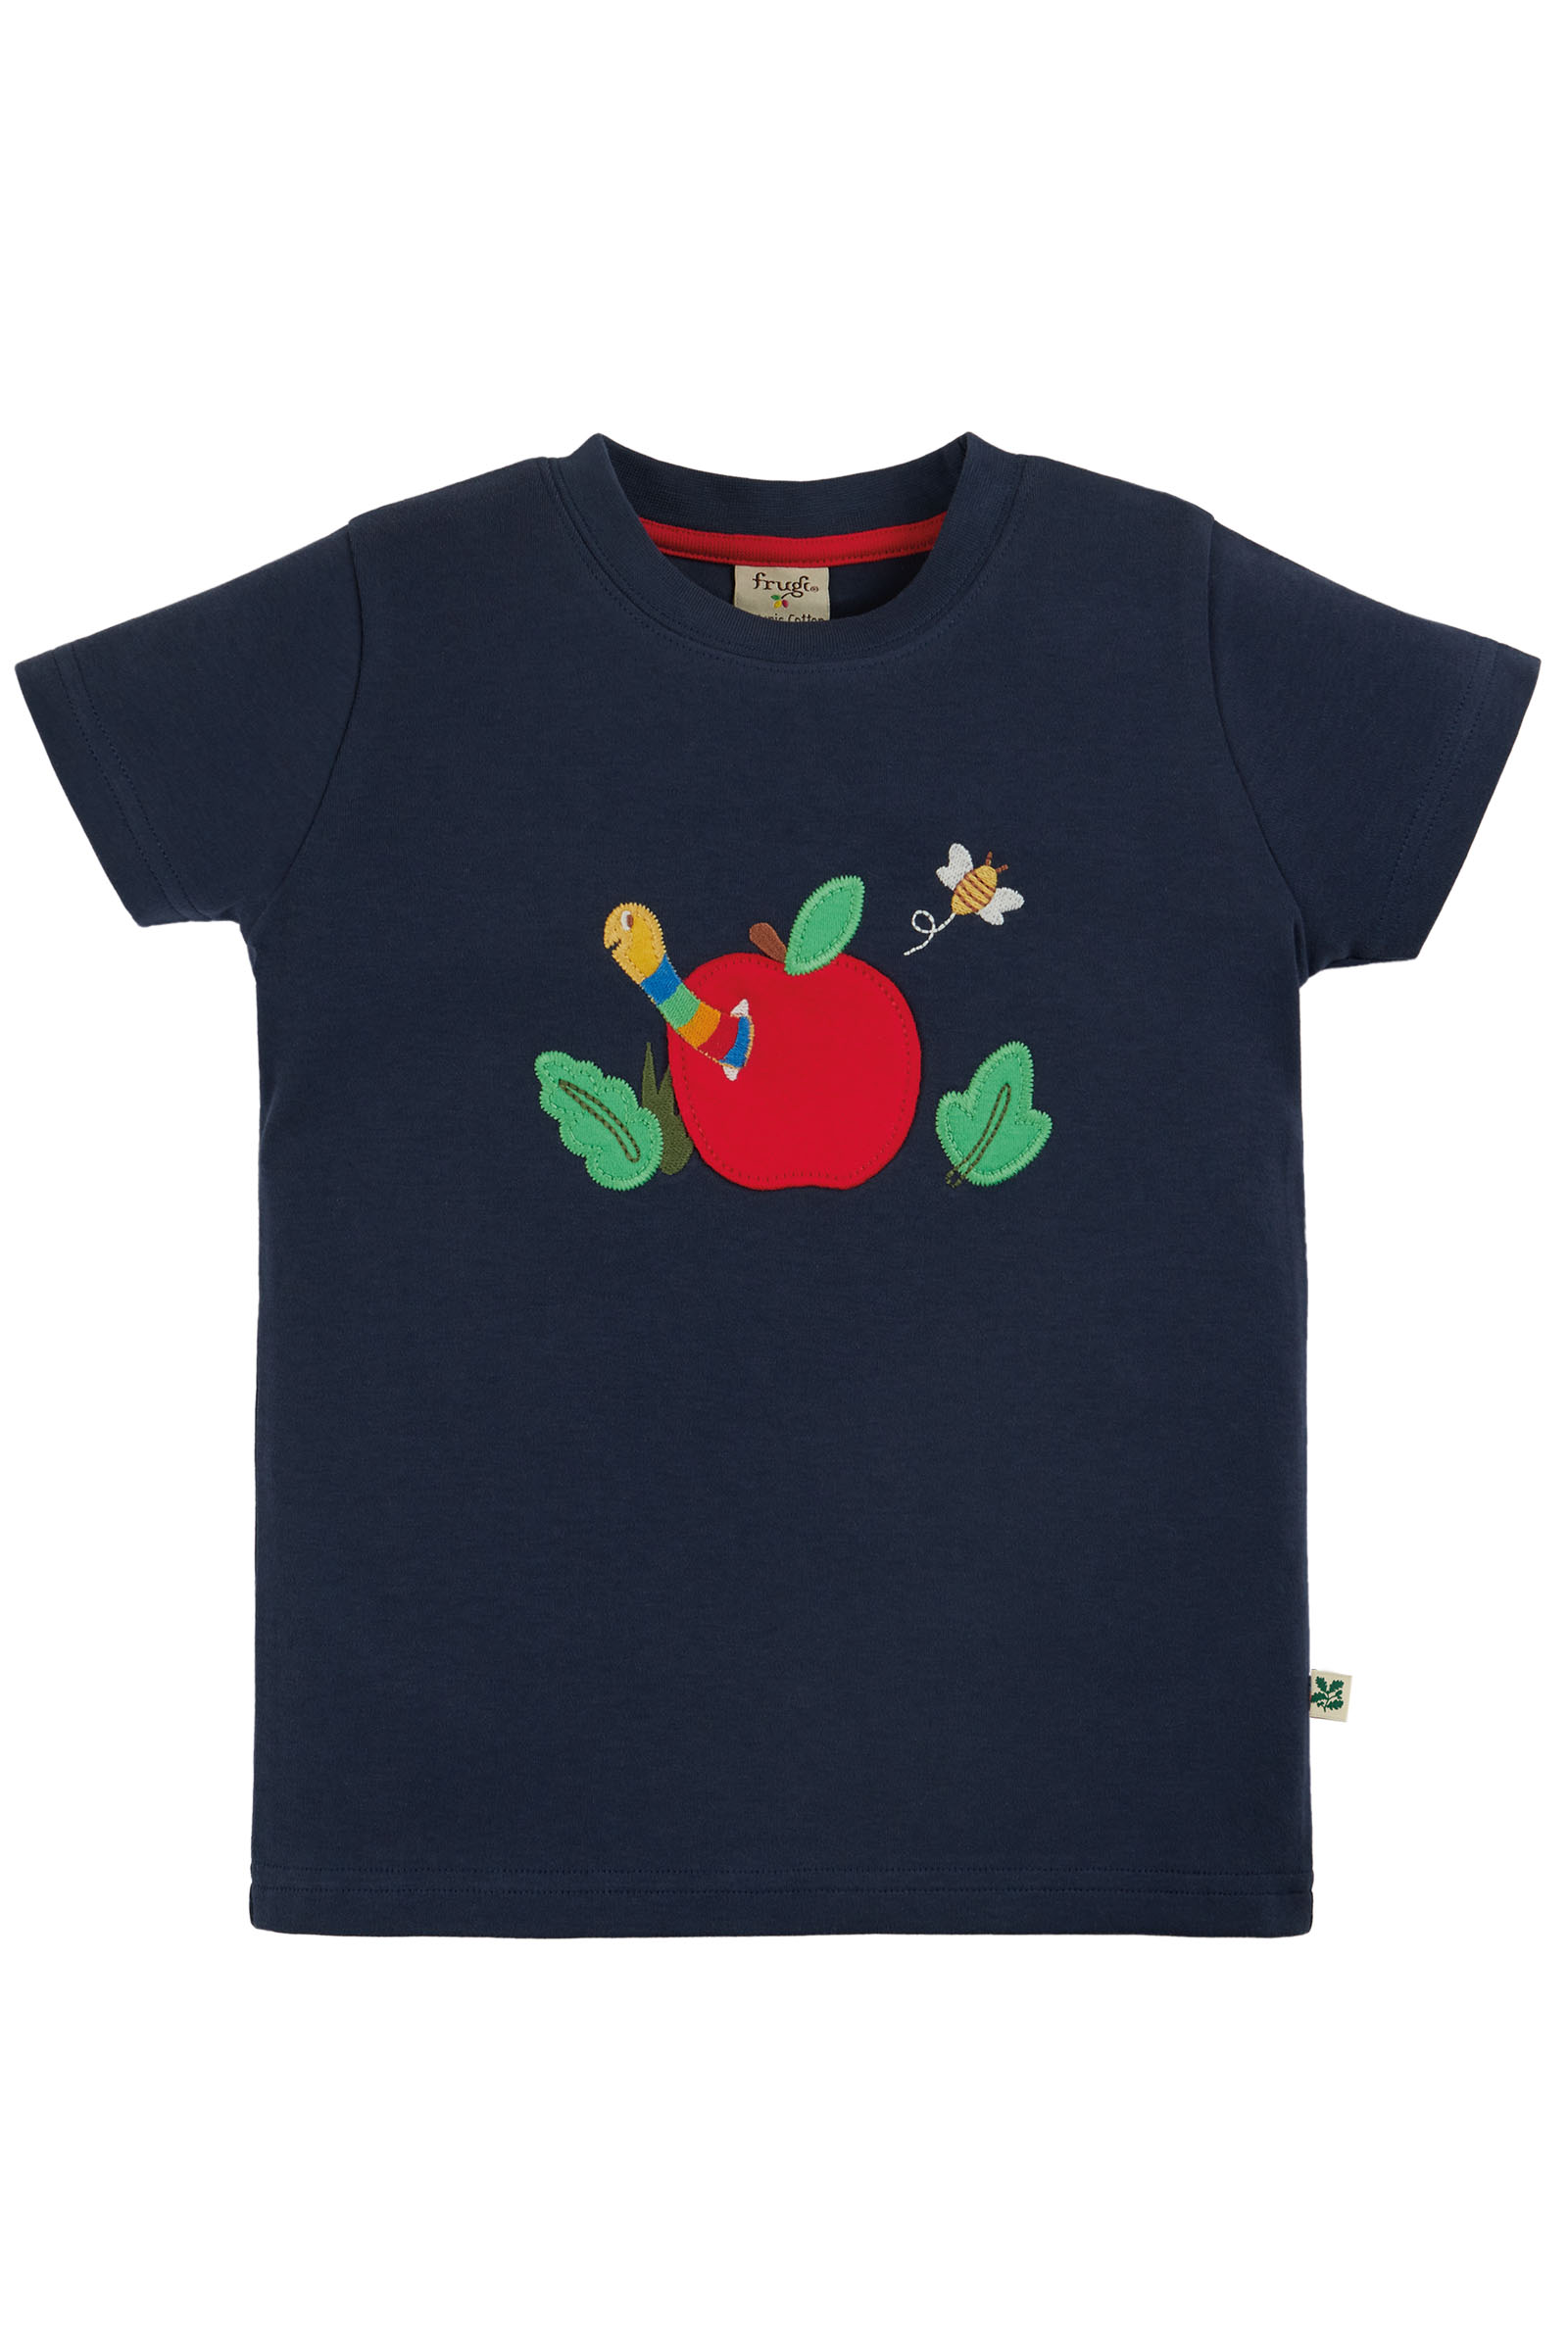 Frugi The National Trust Creature Top - T-Shirt